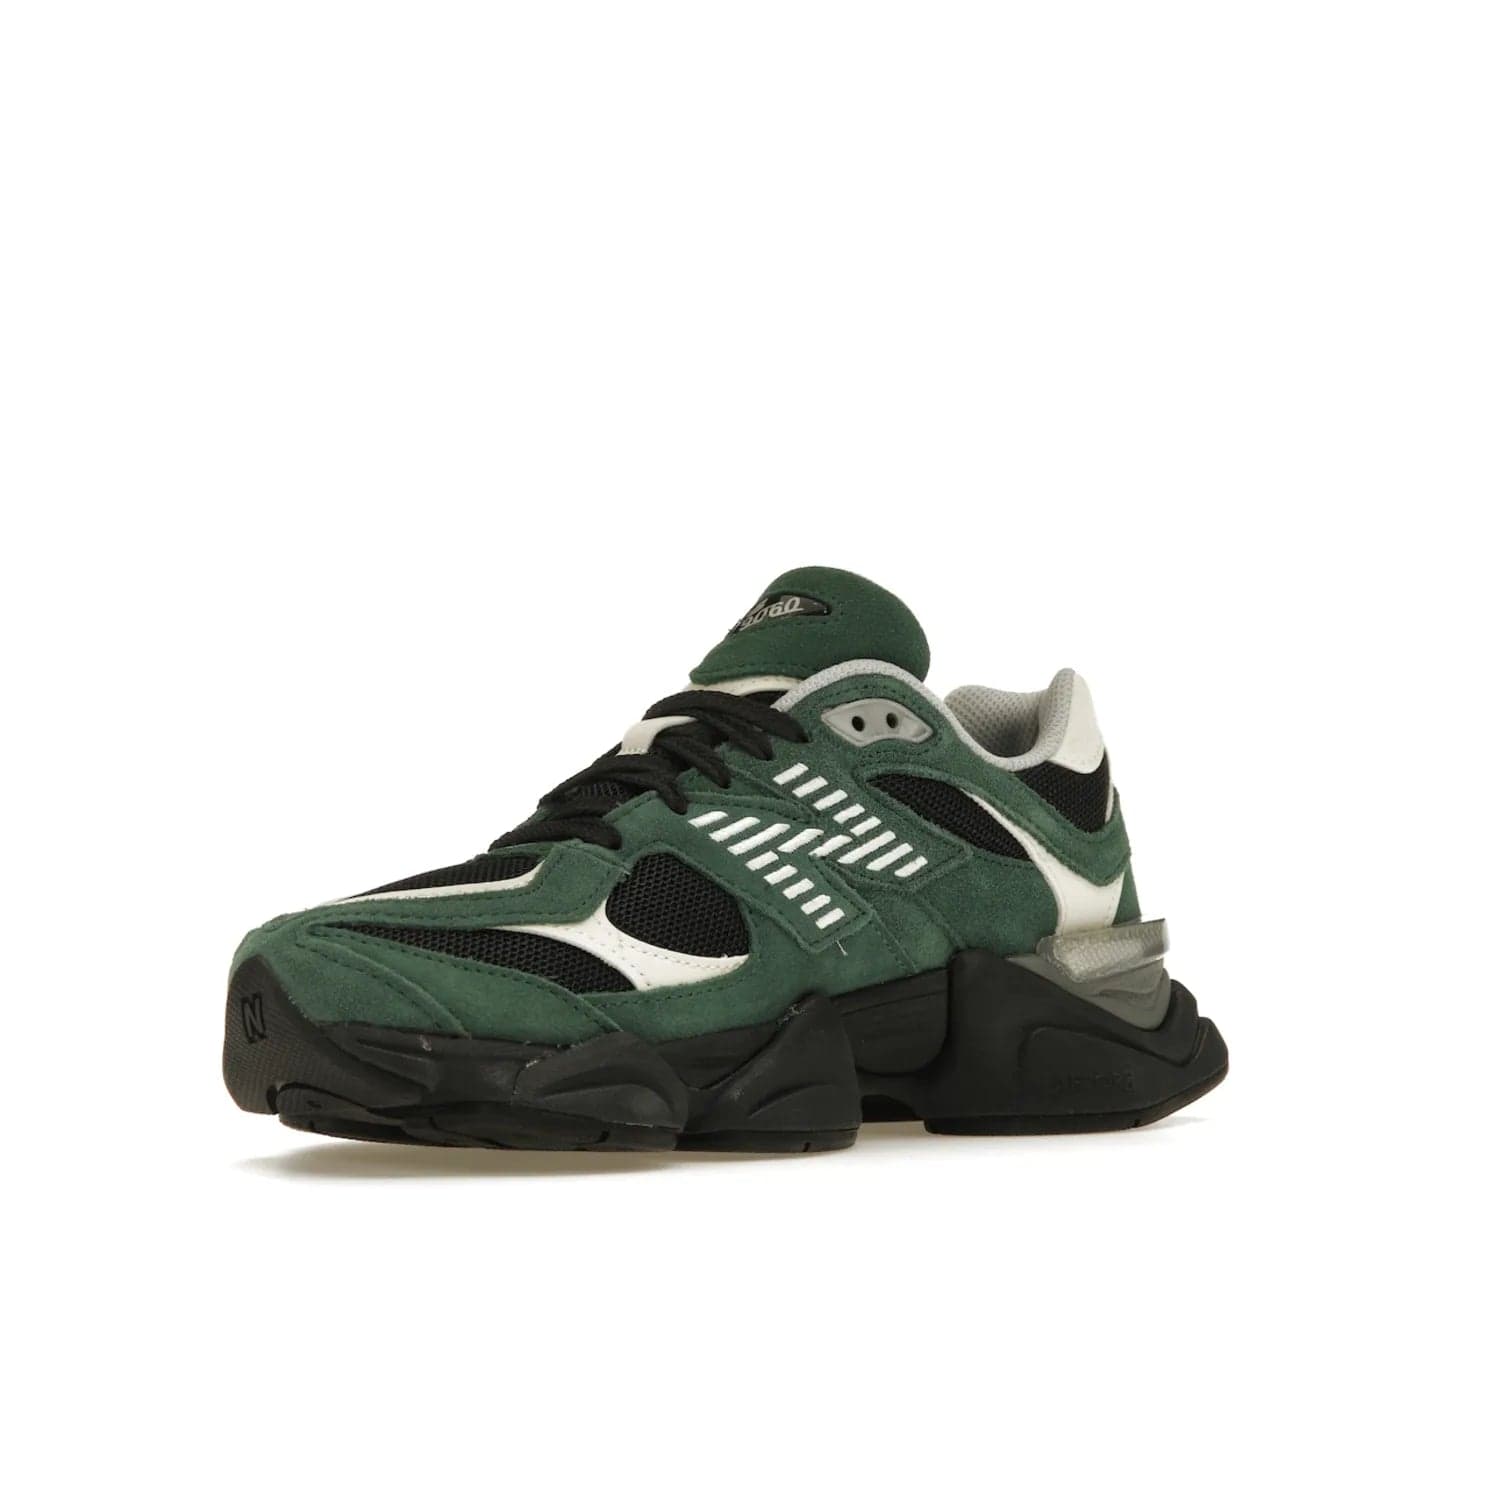 New Balance 9060 Team Forest Green - Image 15 - Only at www.BallersClubKickz.com - Introducing the New Balance 9060 Team Forest Green! Durable statement sneaker with a vibrant forest green upper and contrast detailing. Release date 2023-04-04 - don't miss out!